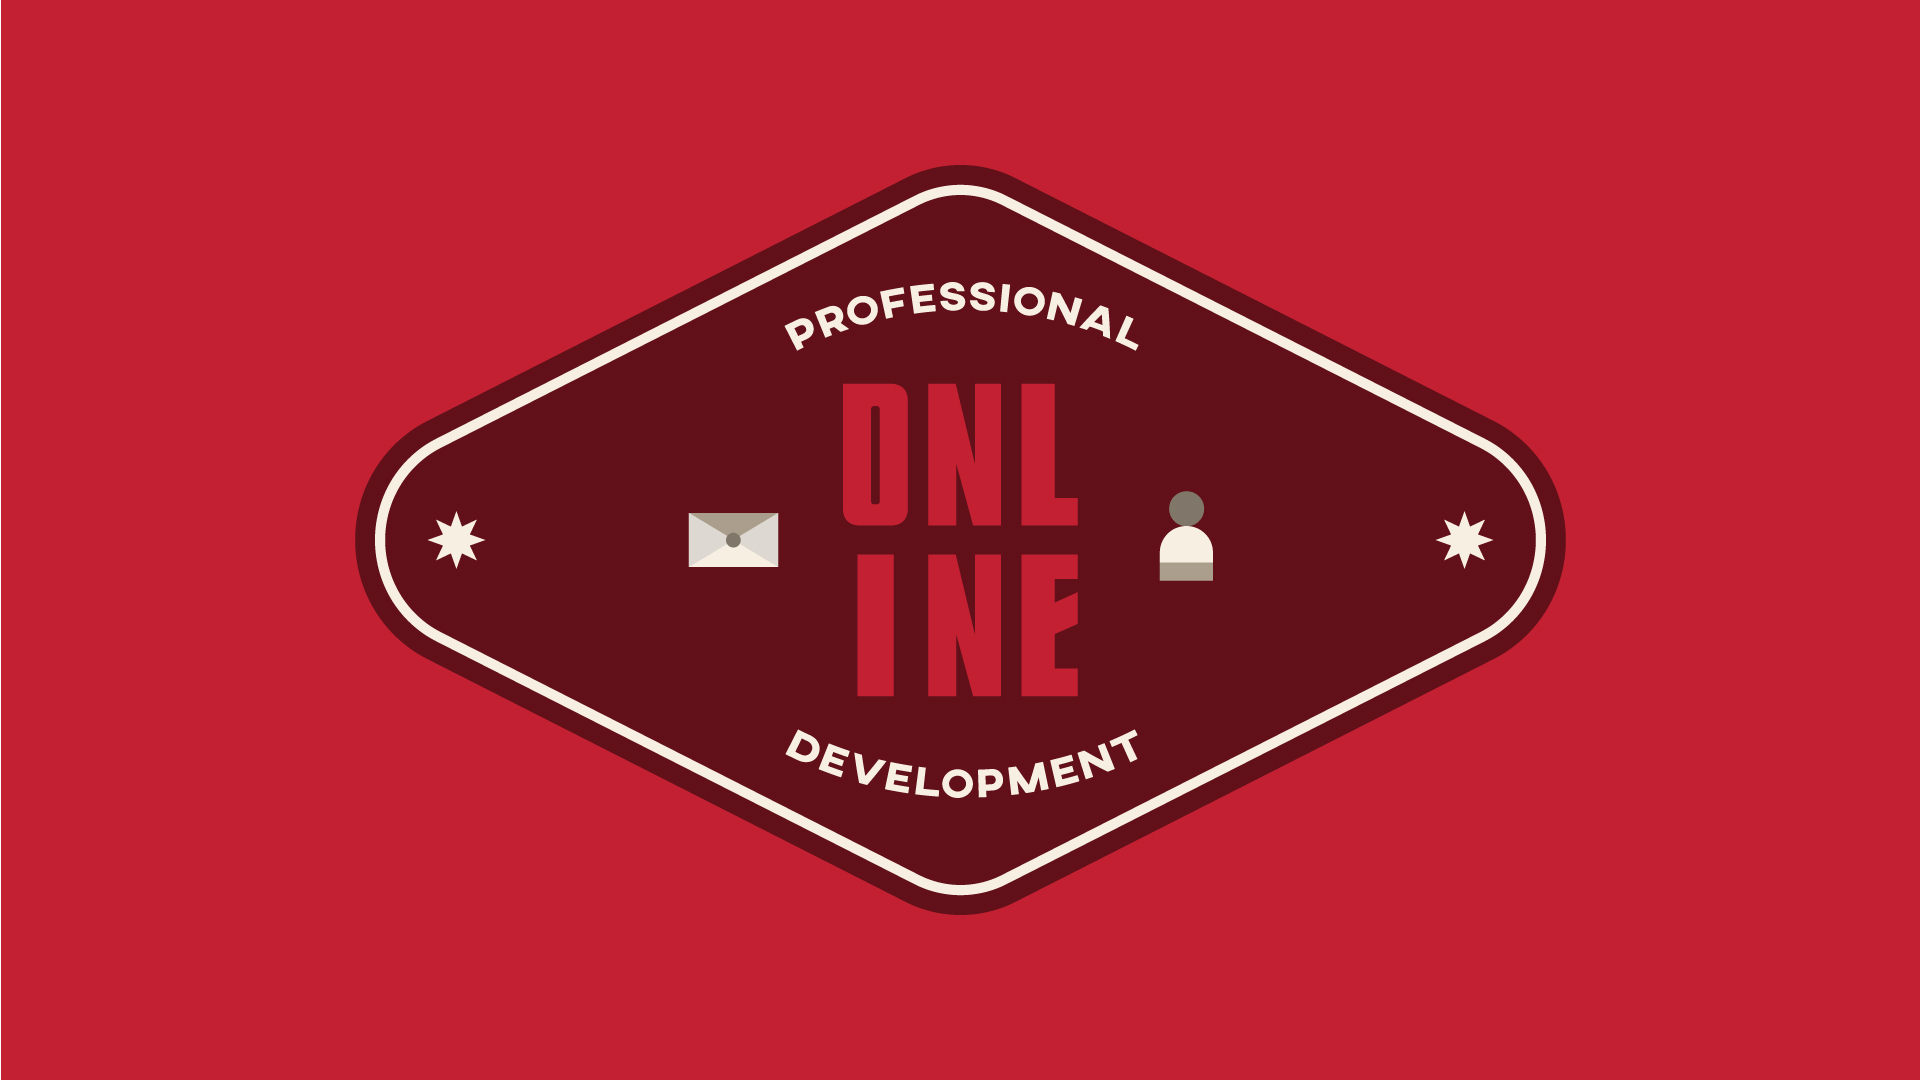 Online Certifications and Professional Development for Marketing Professionals